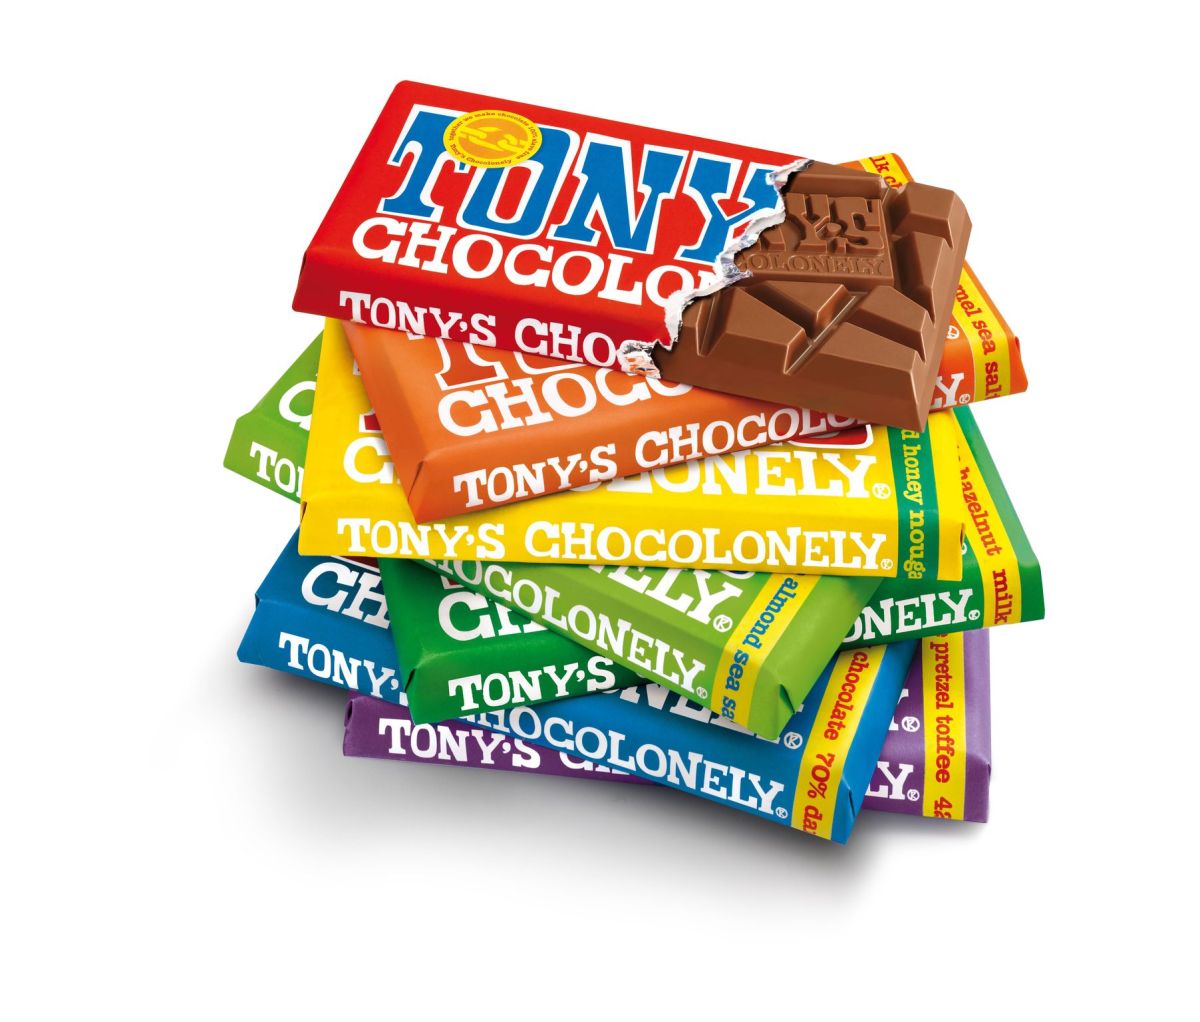 Tony’s Chocolonely: It’s time to change the chocolate industry